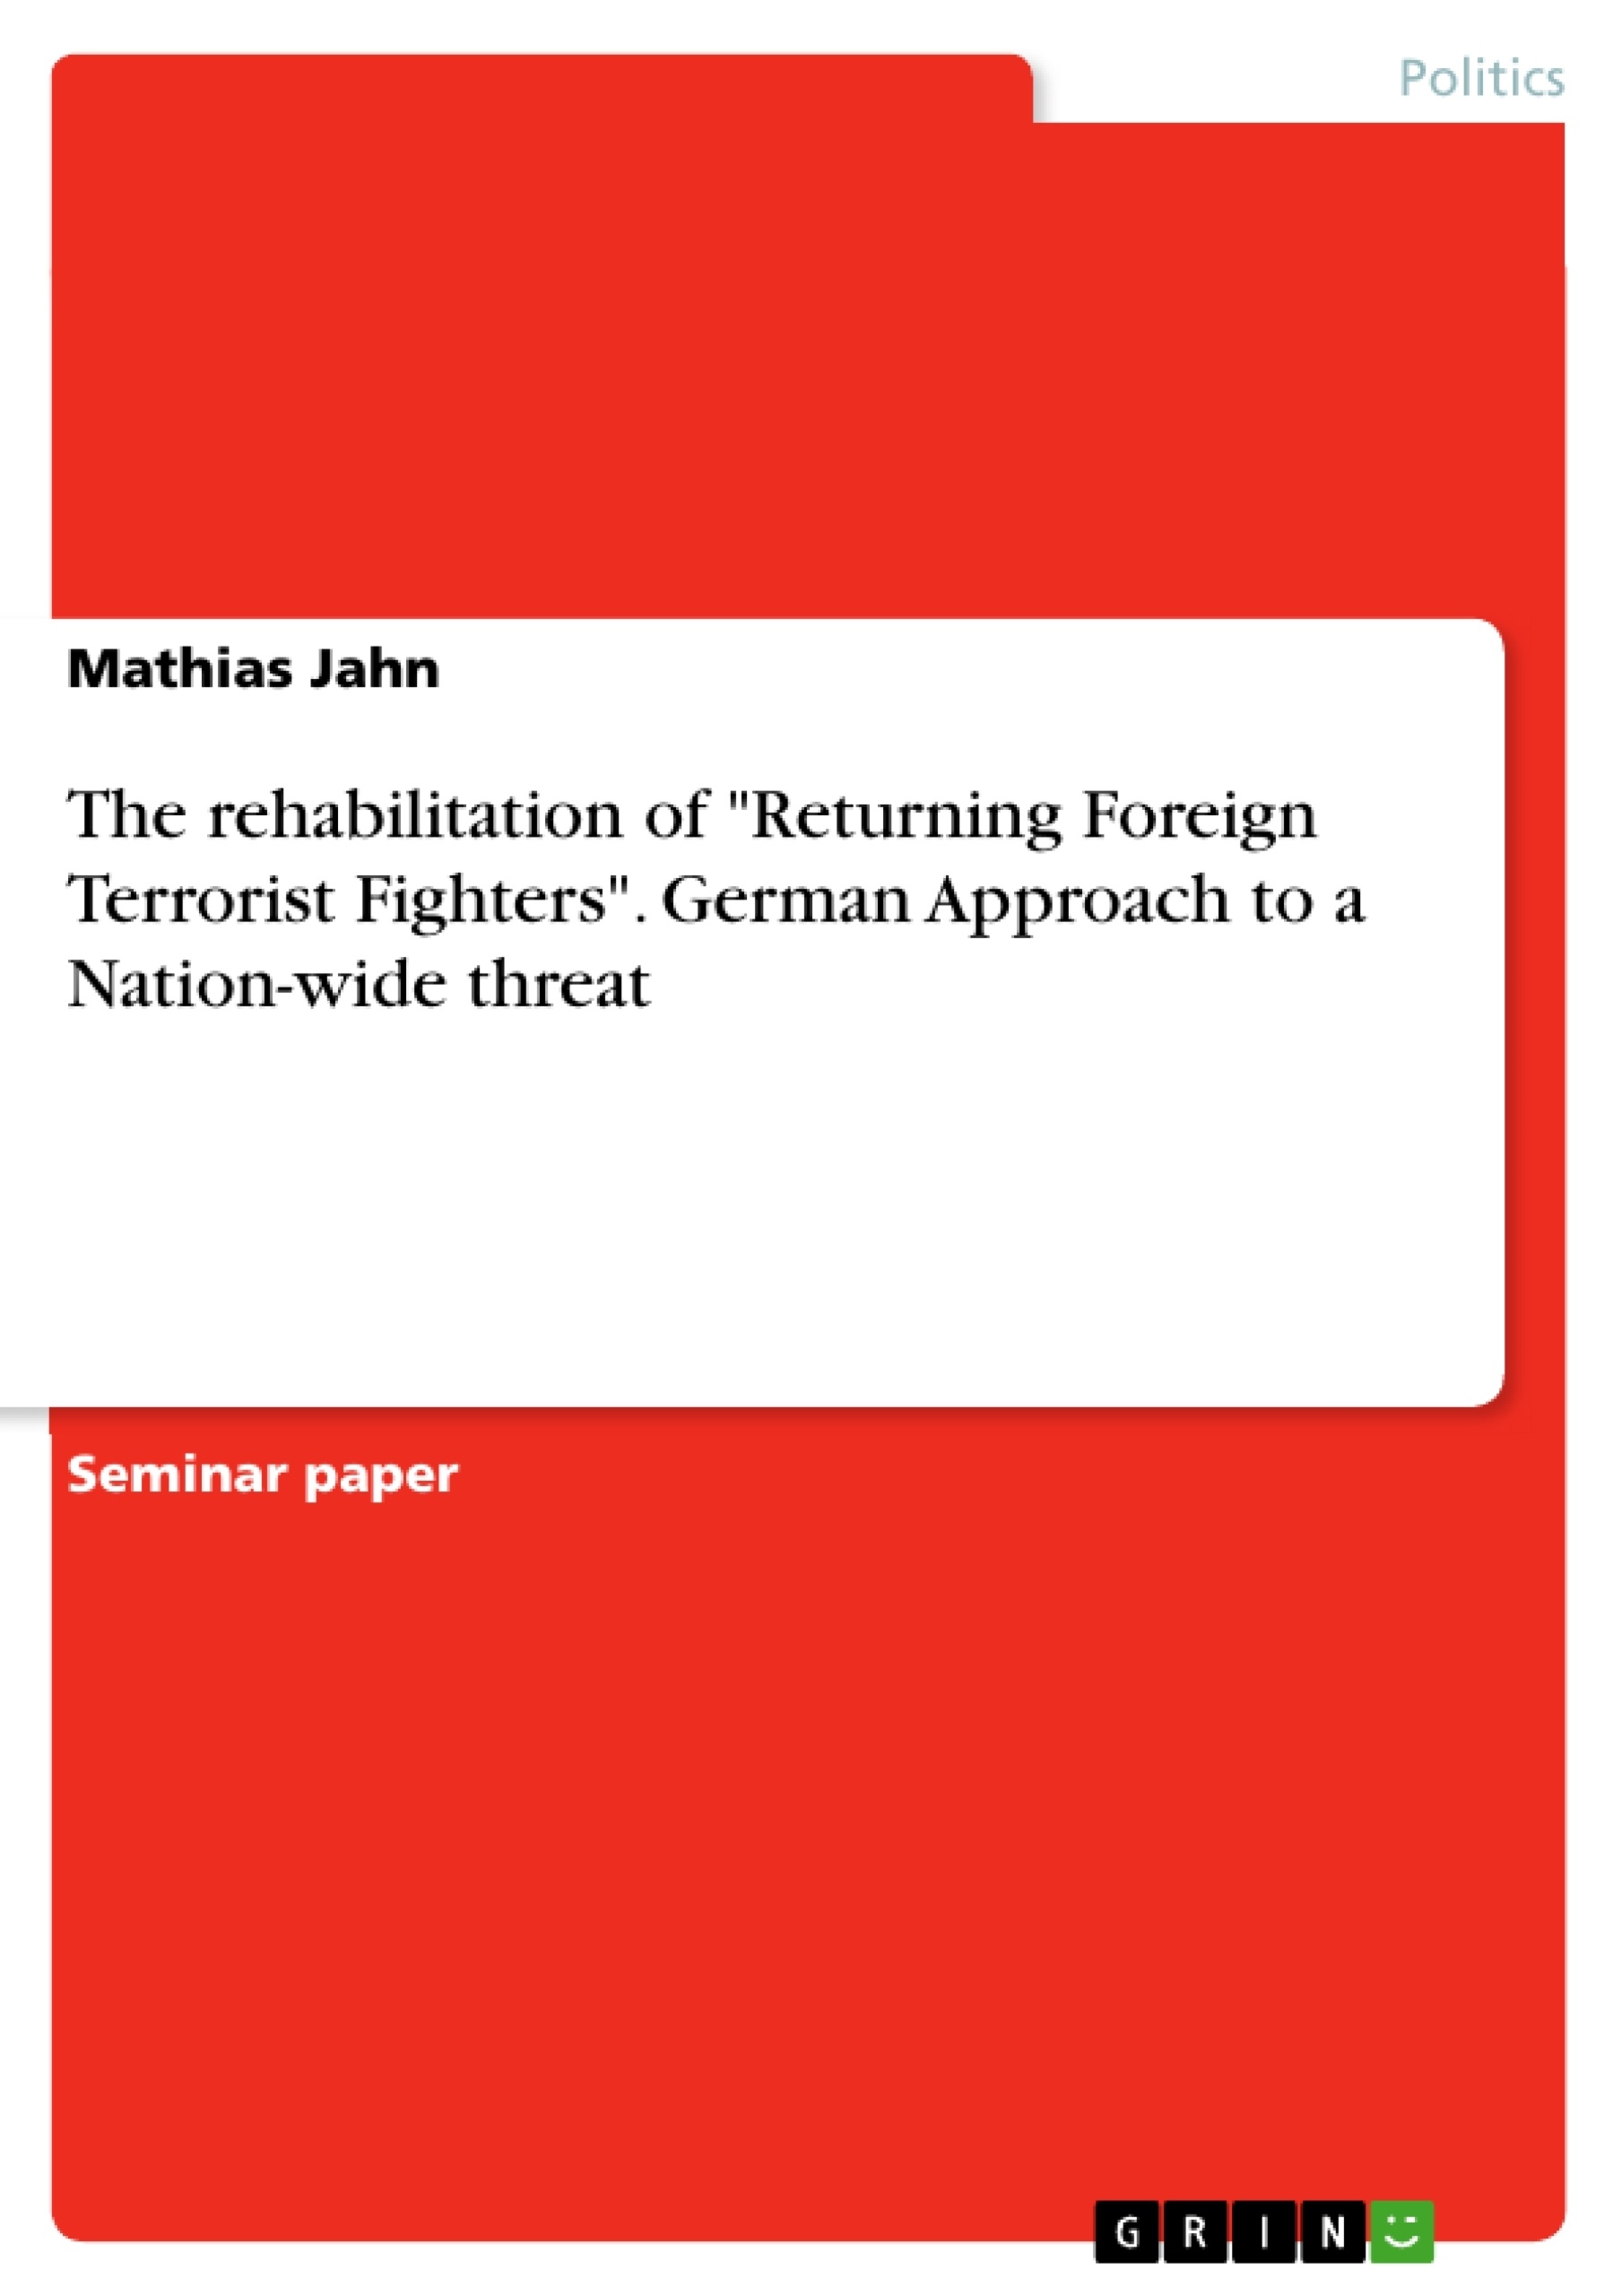 Title: The rehabilitation of "Returning Foreign Terrorist Fighters". German Approach to a Nation-wide threat